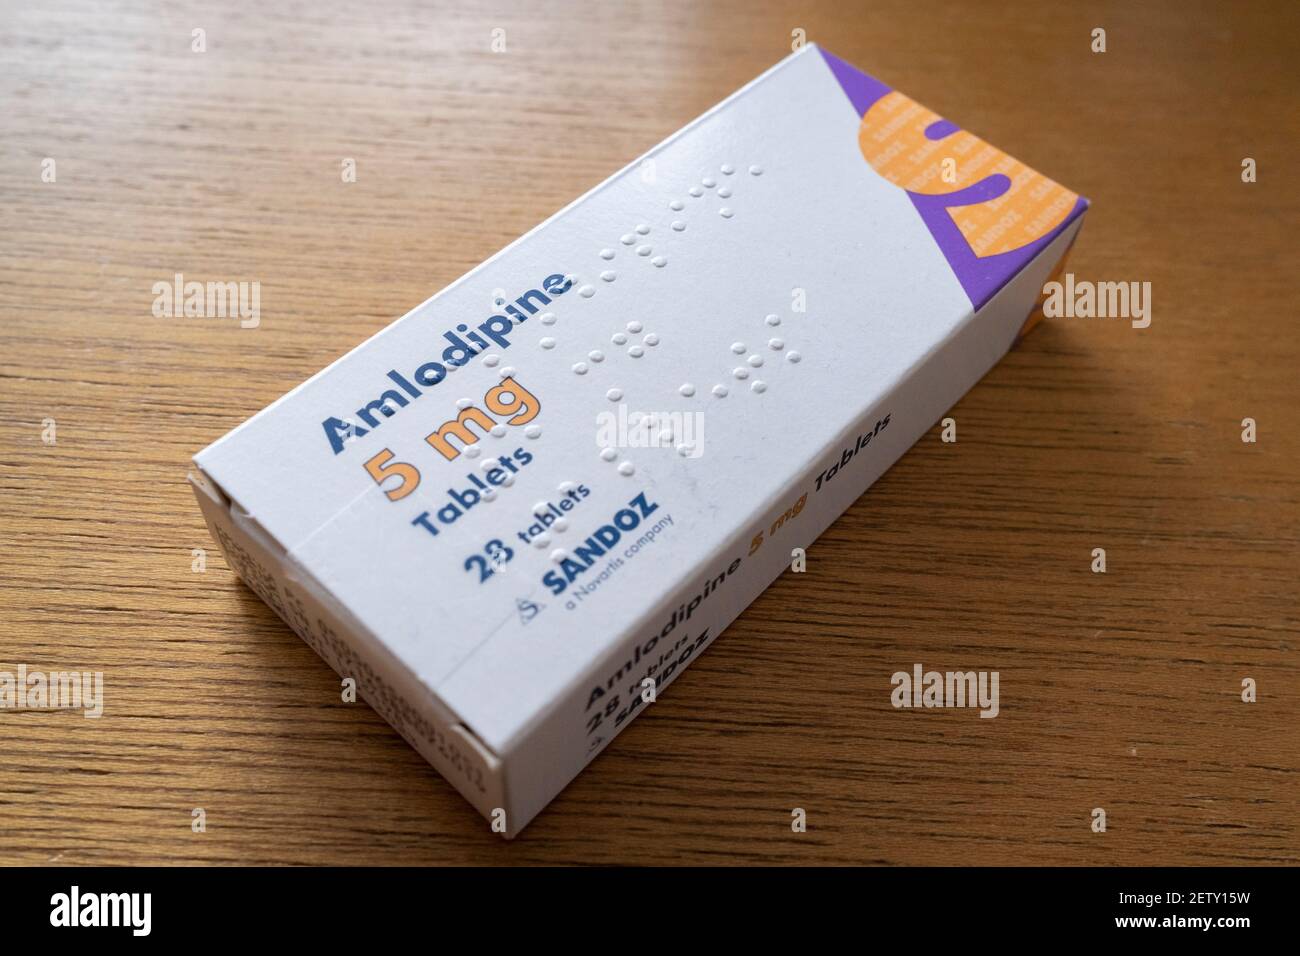 A detailed view of a box of 5mg Amlodipine manufactured by the pharmaceutical Sandoz, a Novartis company, on 1st March 2021, in London, England. Amlodipine is known as a Calcium Blocker used for the reduction of Hypertension (high blood pressure). Stock Photo